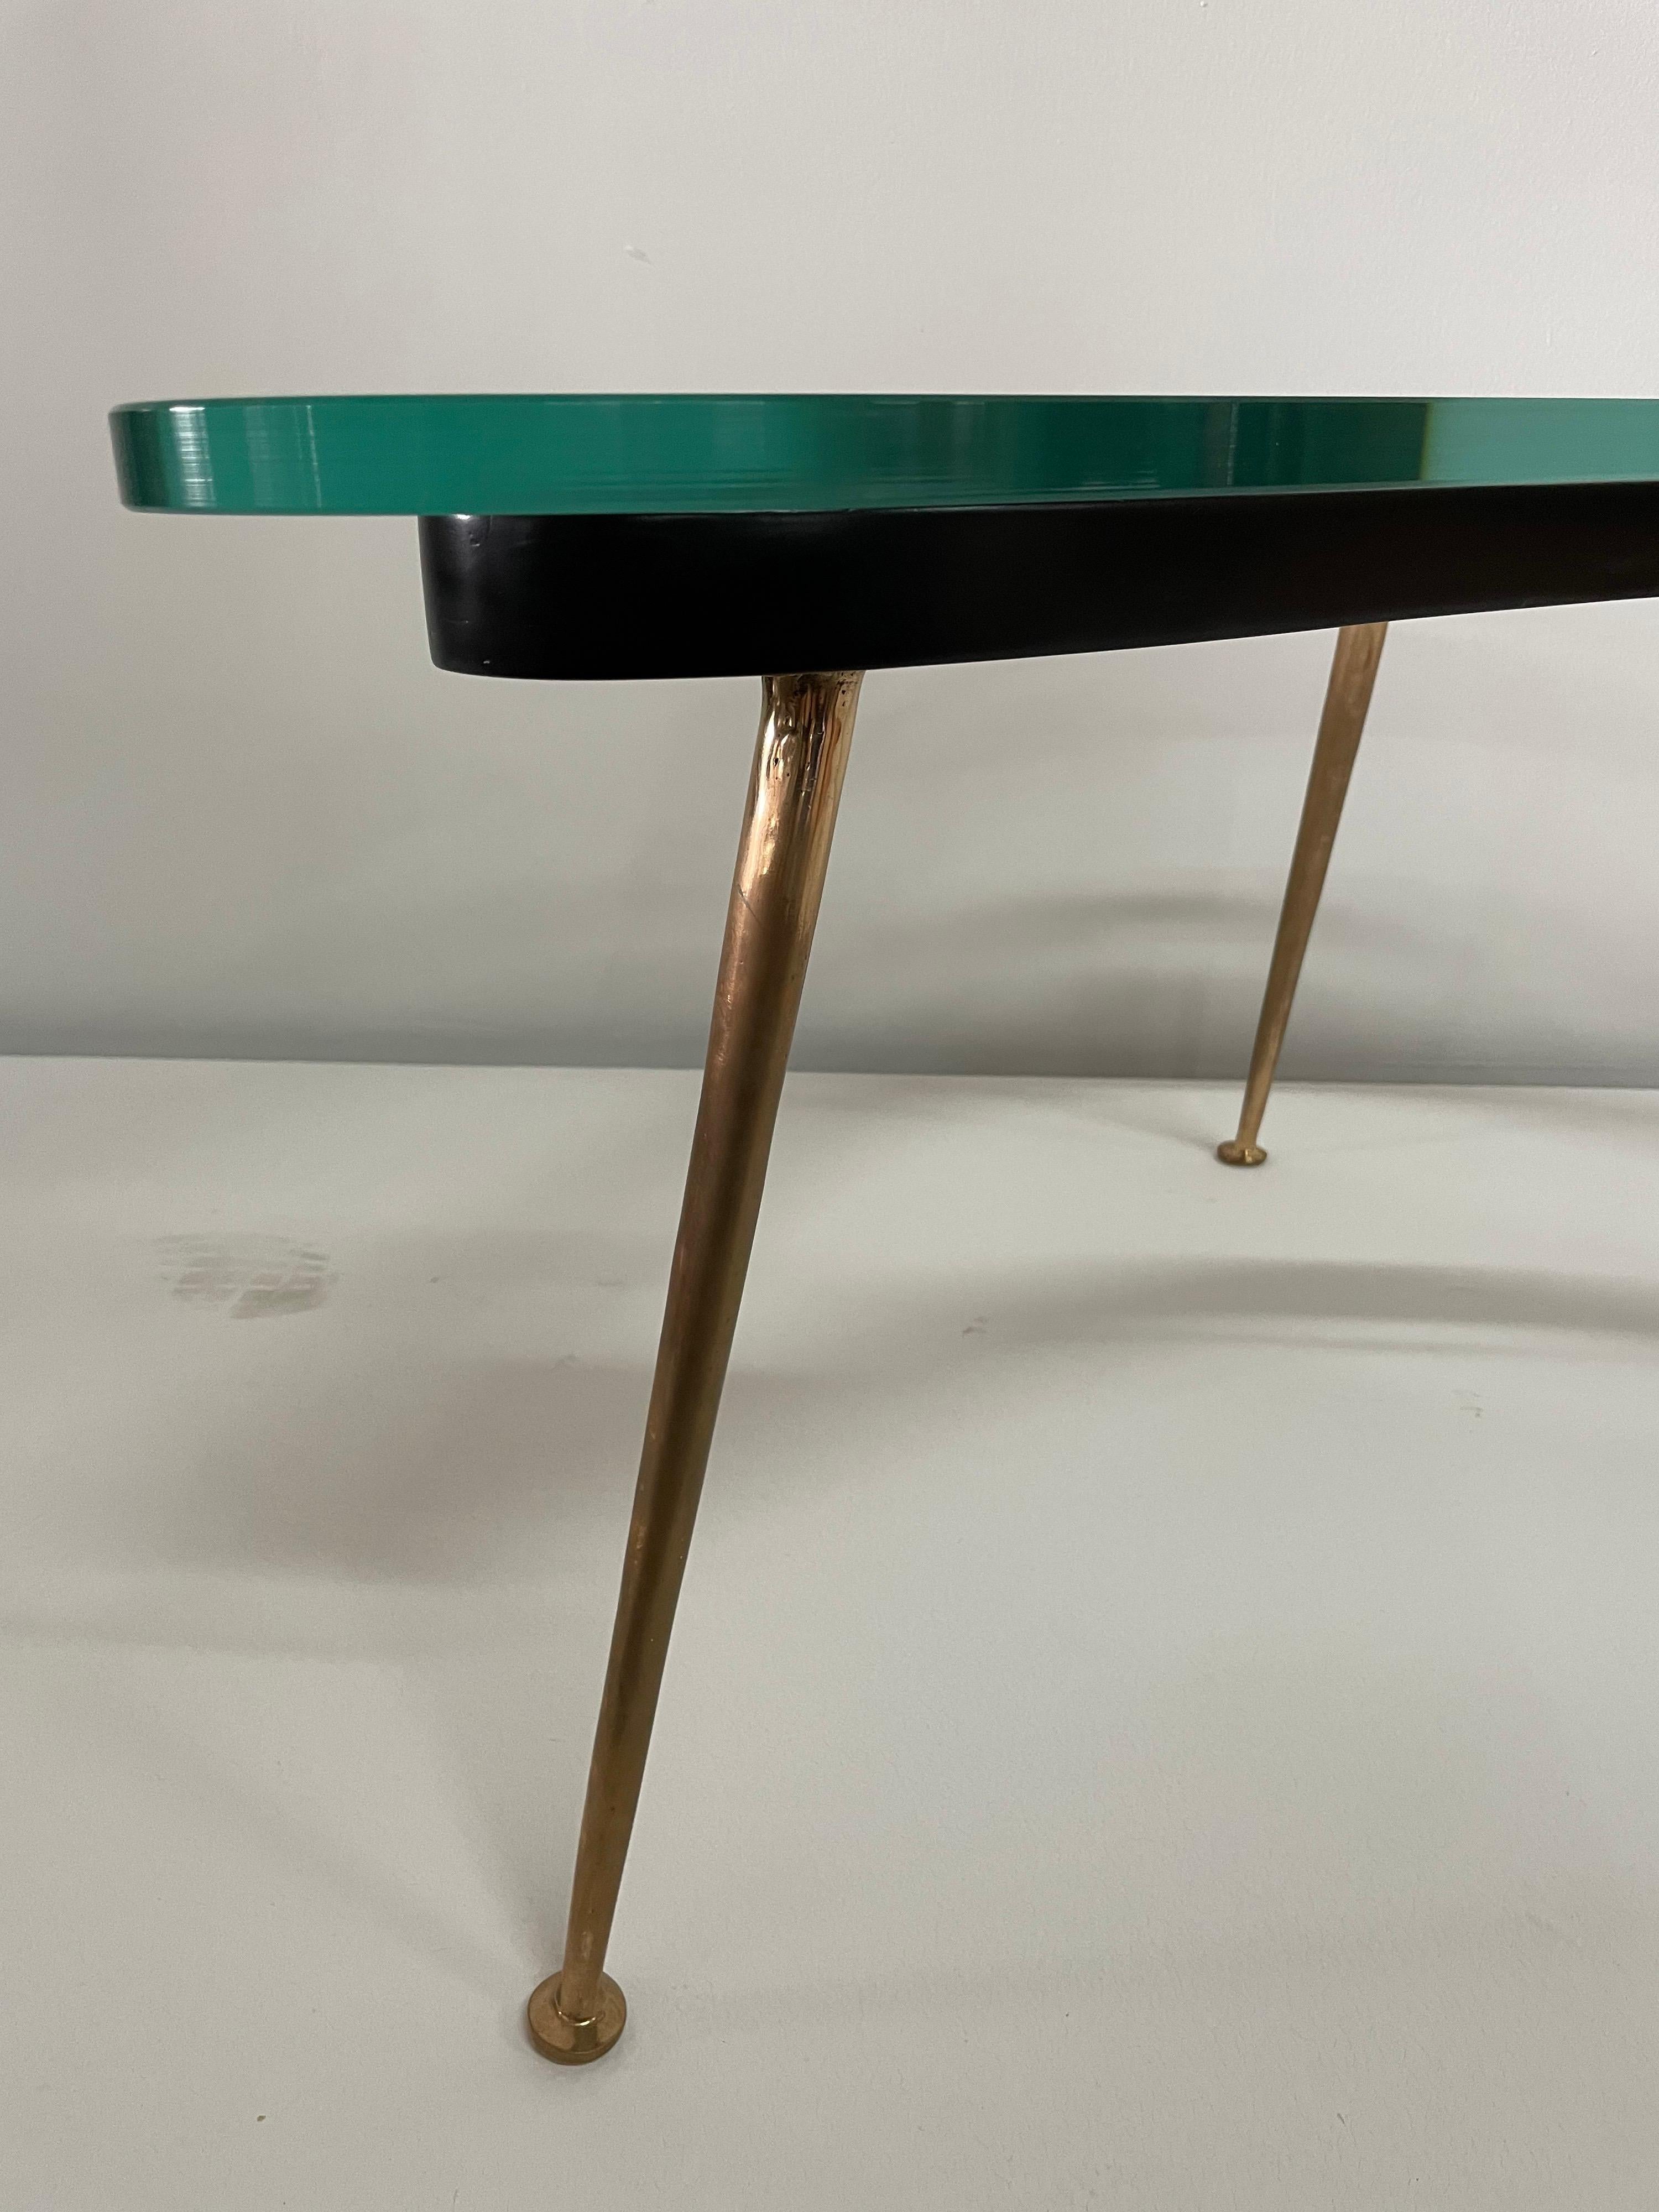 Italian Modernist Boomerang Style Cocktail Table In Good Condition For Sale In East Hampton, NY